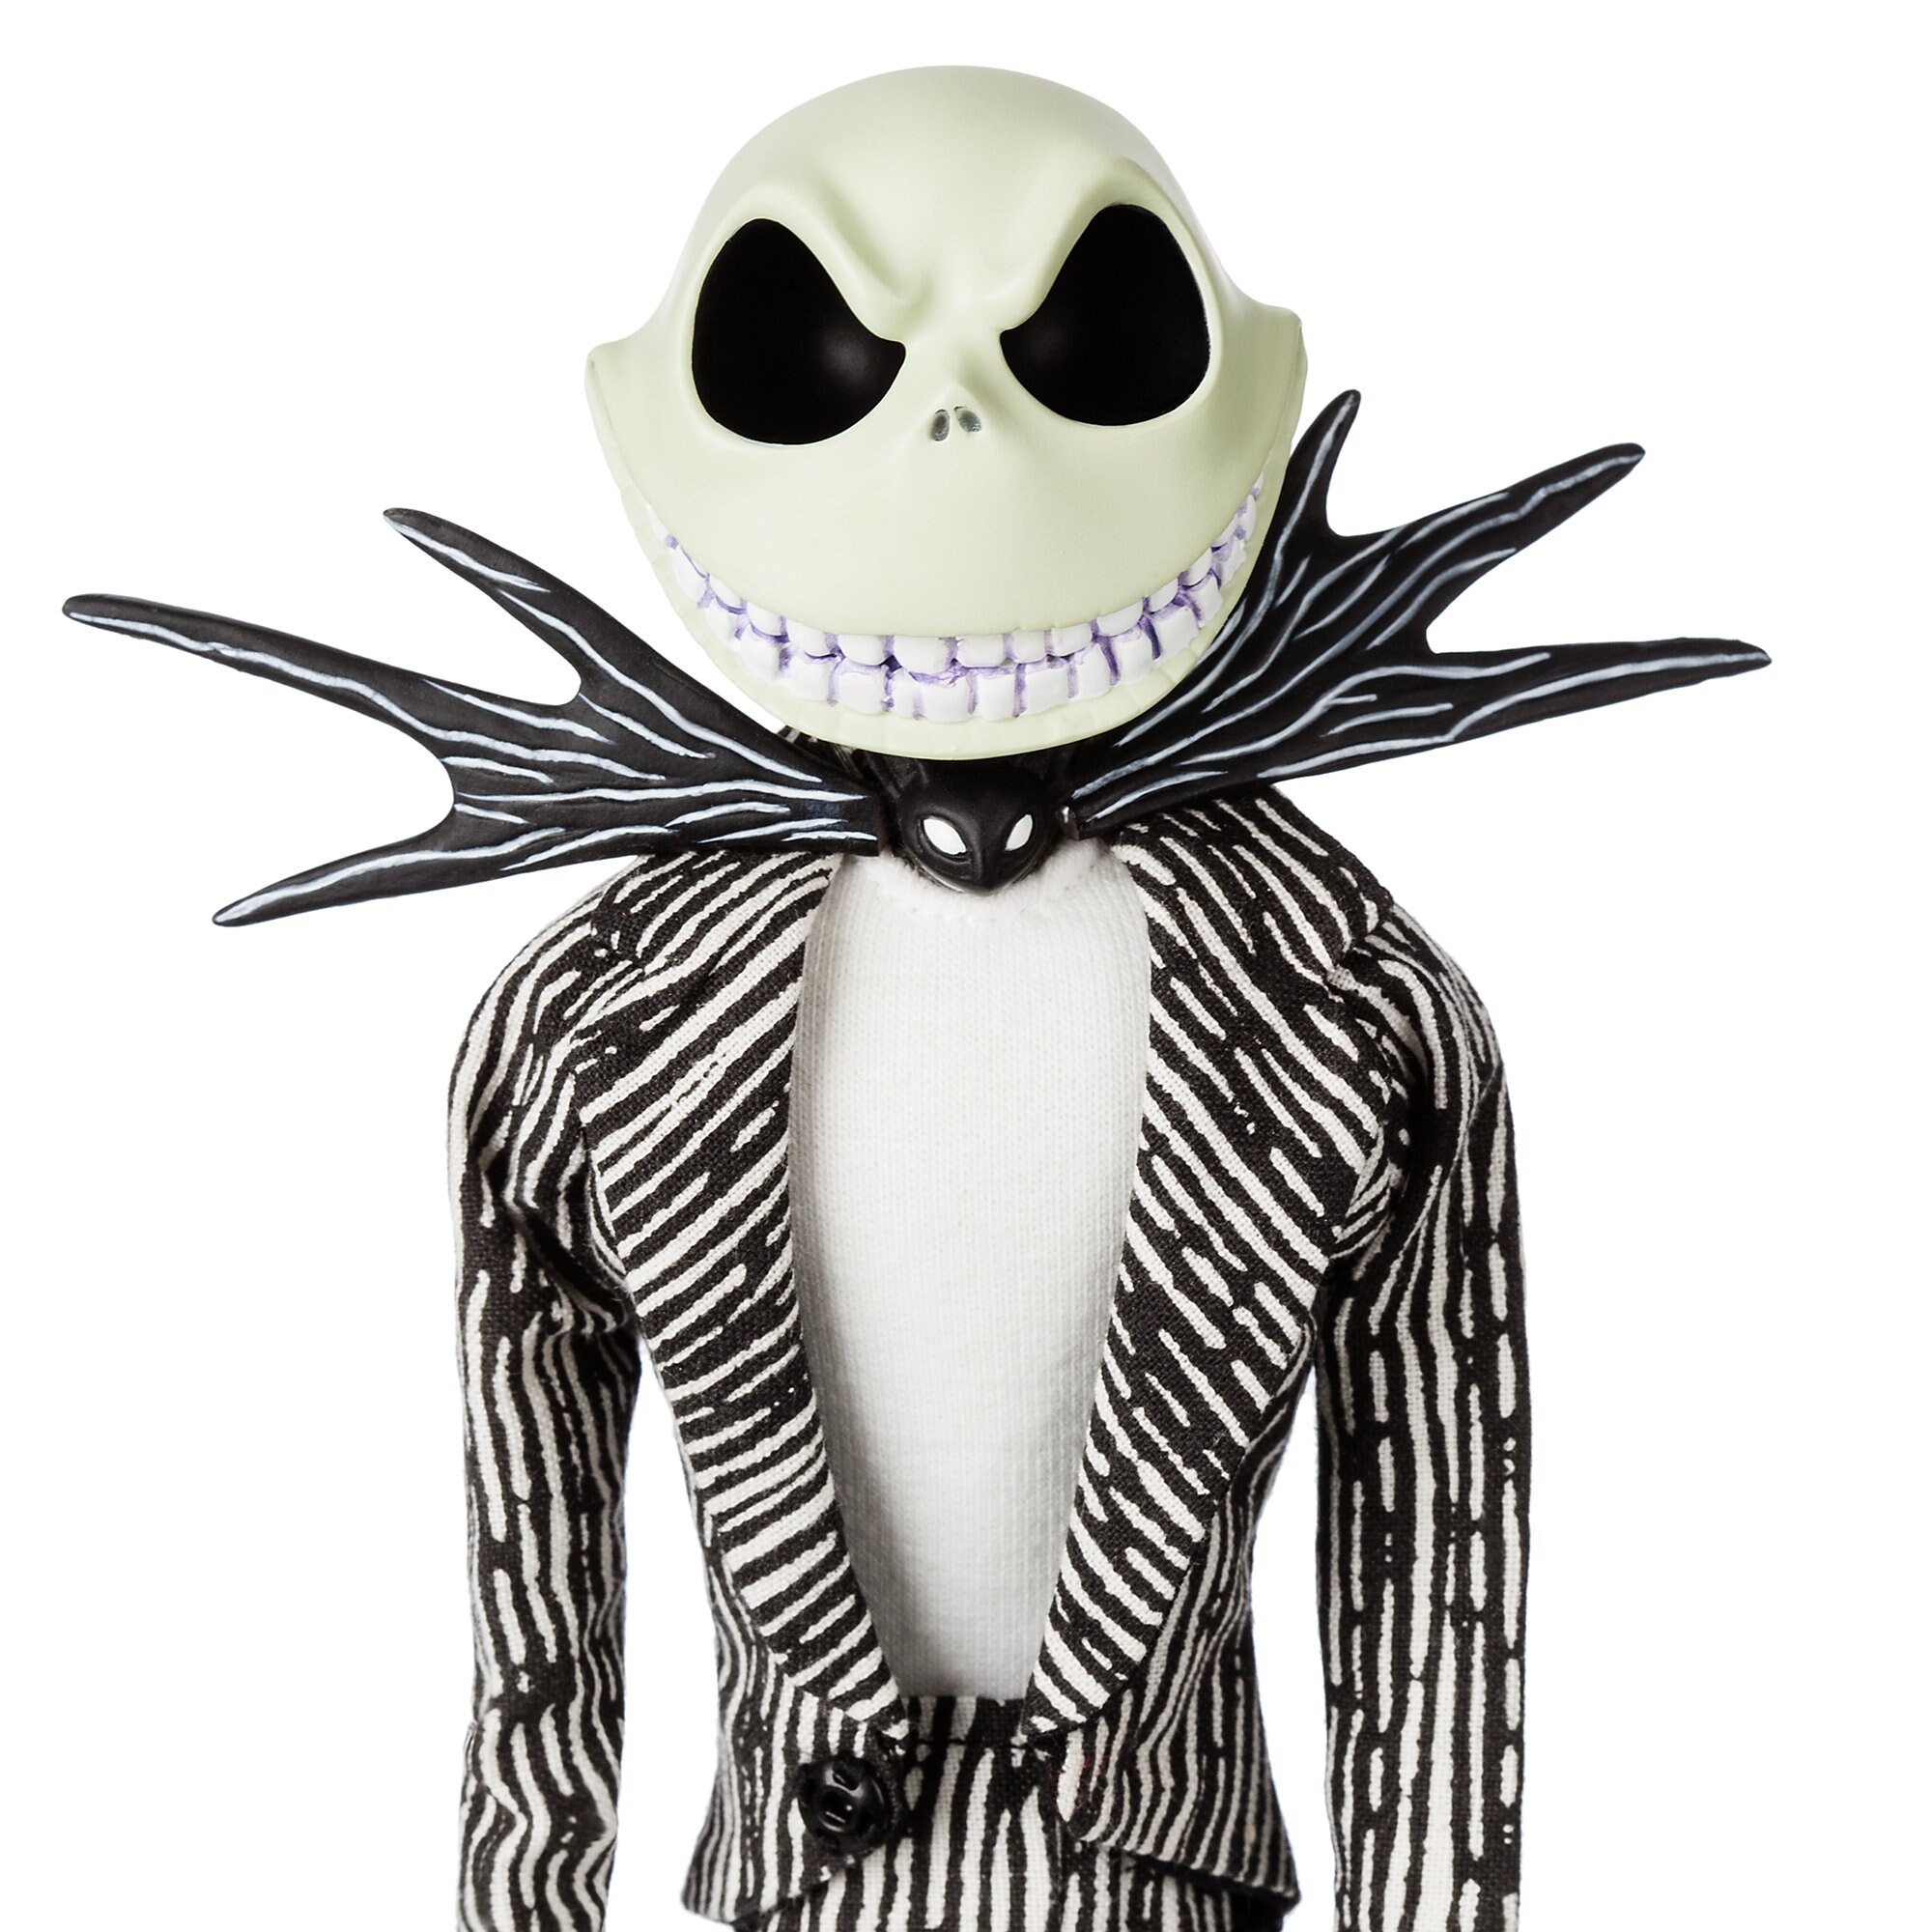 Jack Skellington 25th Anniversary Limited Edition Doll - The Nightmare Before Christmas